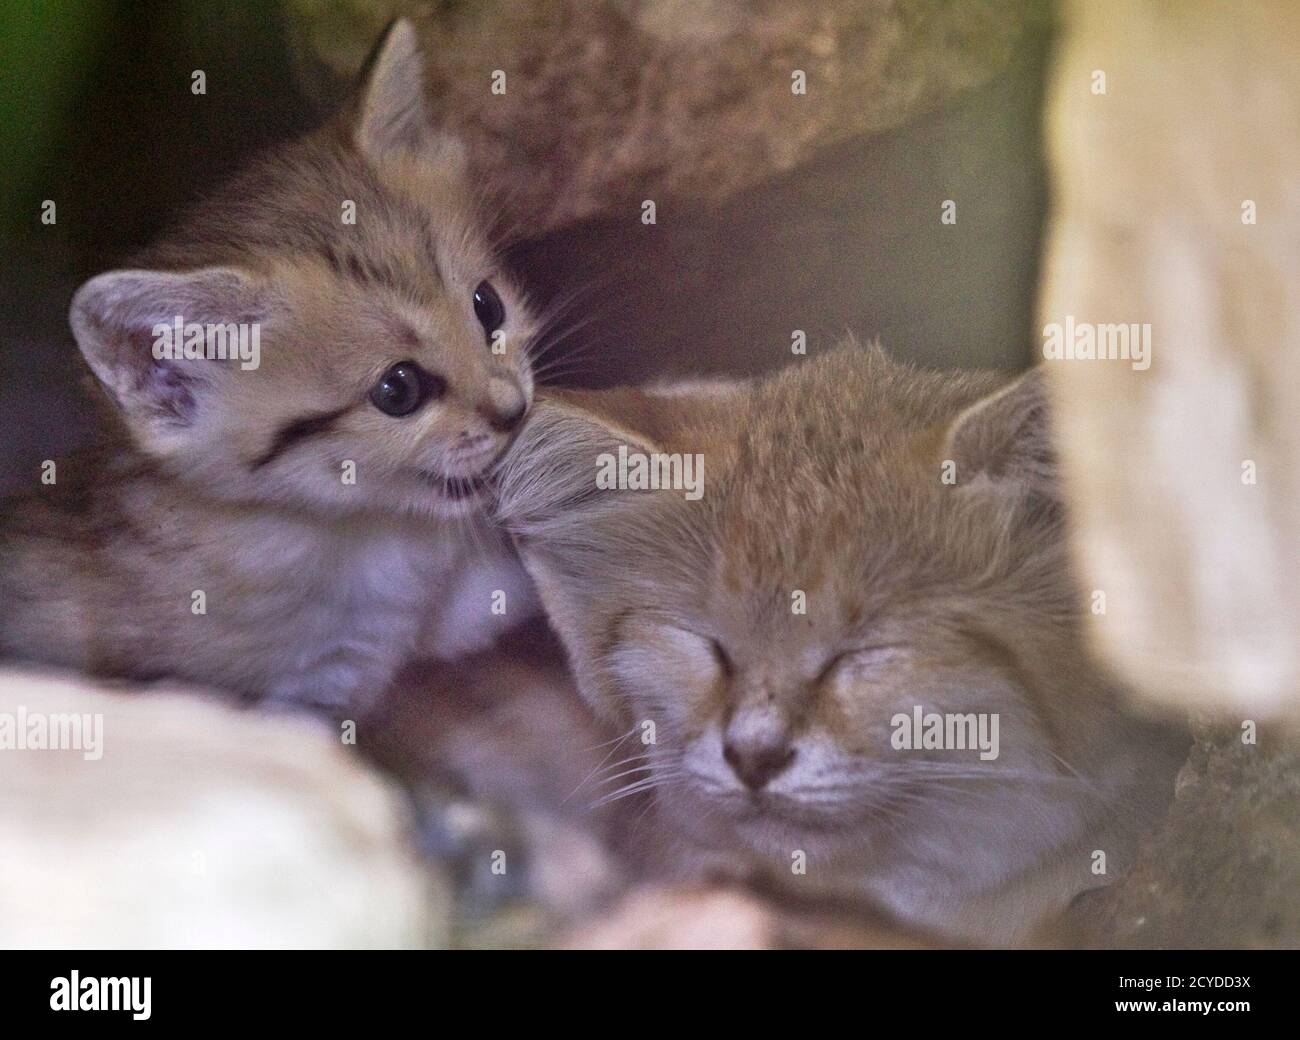 Renana (L), a 3-week-old sand kitten, is seen next to her mother Rotem at the Ramat Gan Safari near Tel Aviv August 8, 2011. The kitten is the first of the sand cat species, considered extinct in Israel, to be born at the safari park, an open-air zoo, a statement from the safari said. REUTERS/Nir Elias (ISRAEL - Tags: ANIMALS ENVIRONMENT) Stock Photo